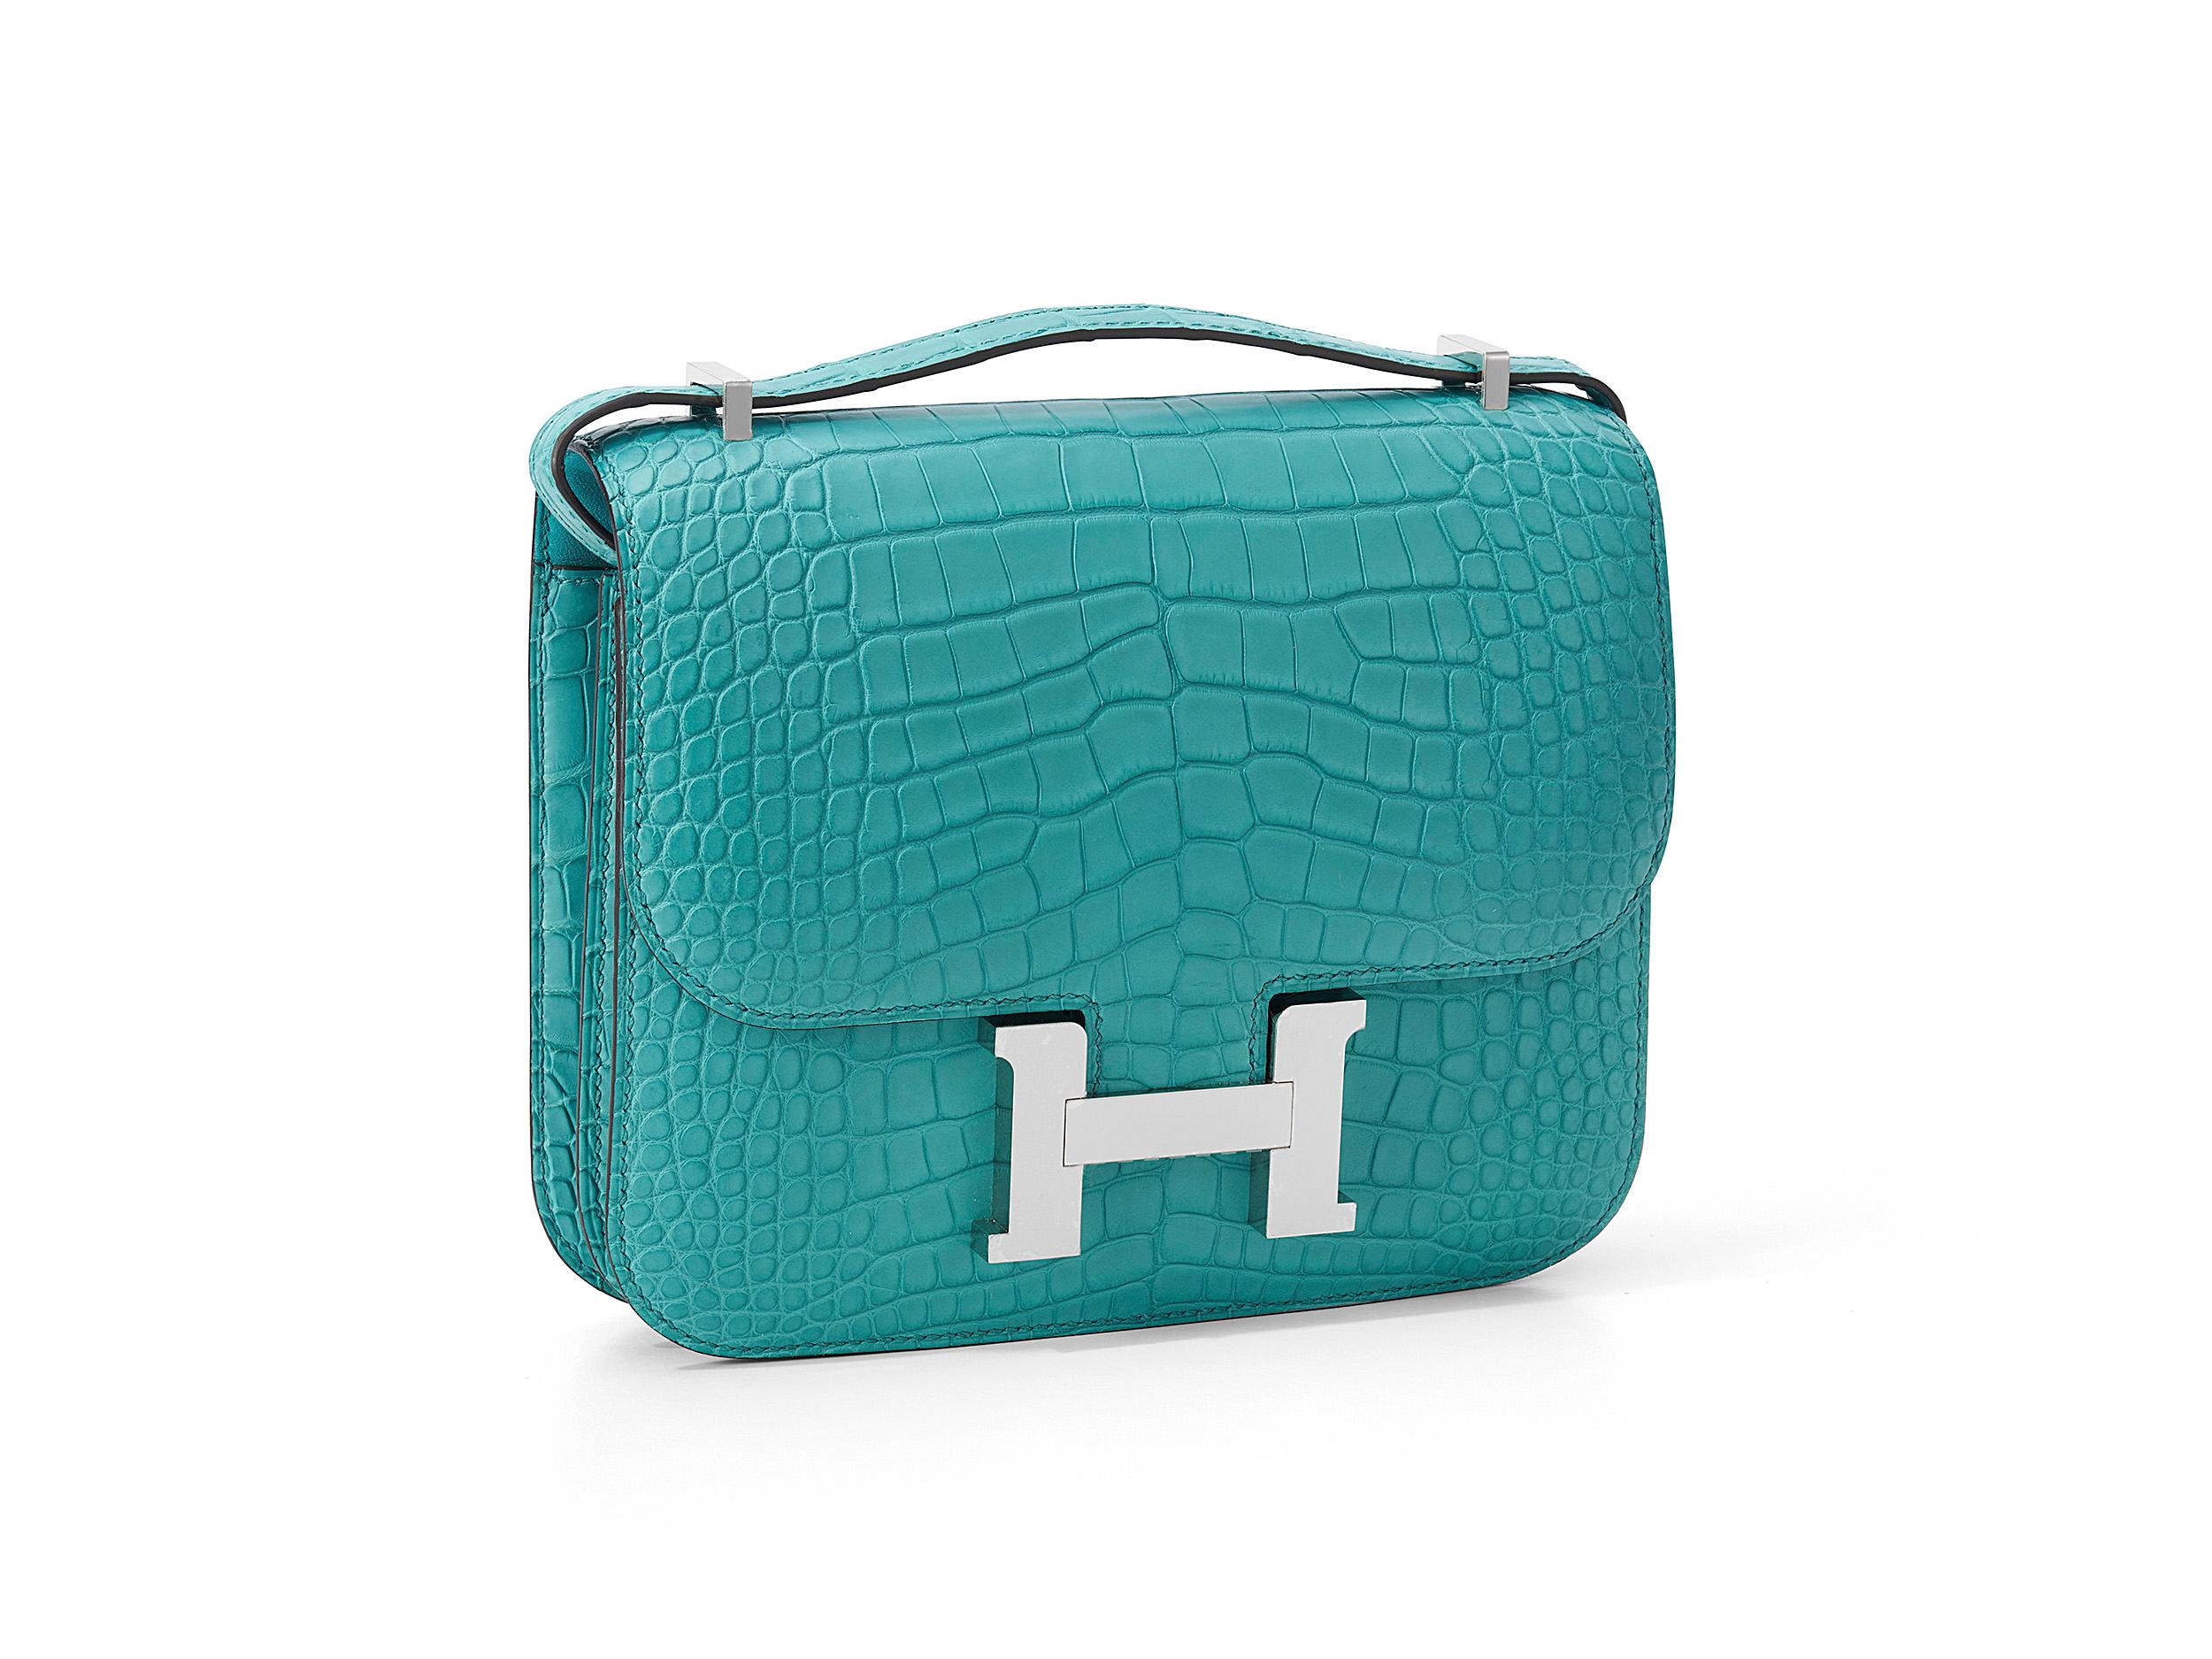 Hermès Constance Mini 18 in bleu paon and alligator matte leather with palladium hardware. The bag is unworn and comes as full set including the original receipt and Cites. 
Stamp Y (2020) 

